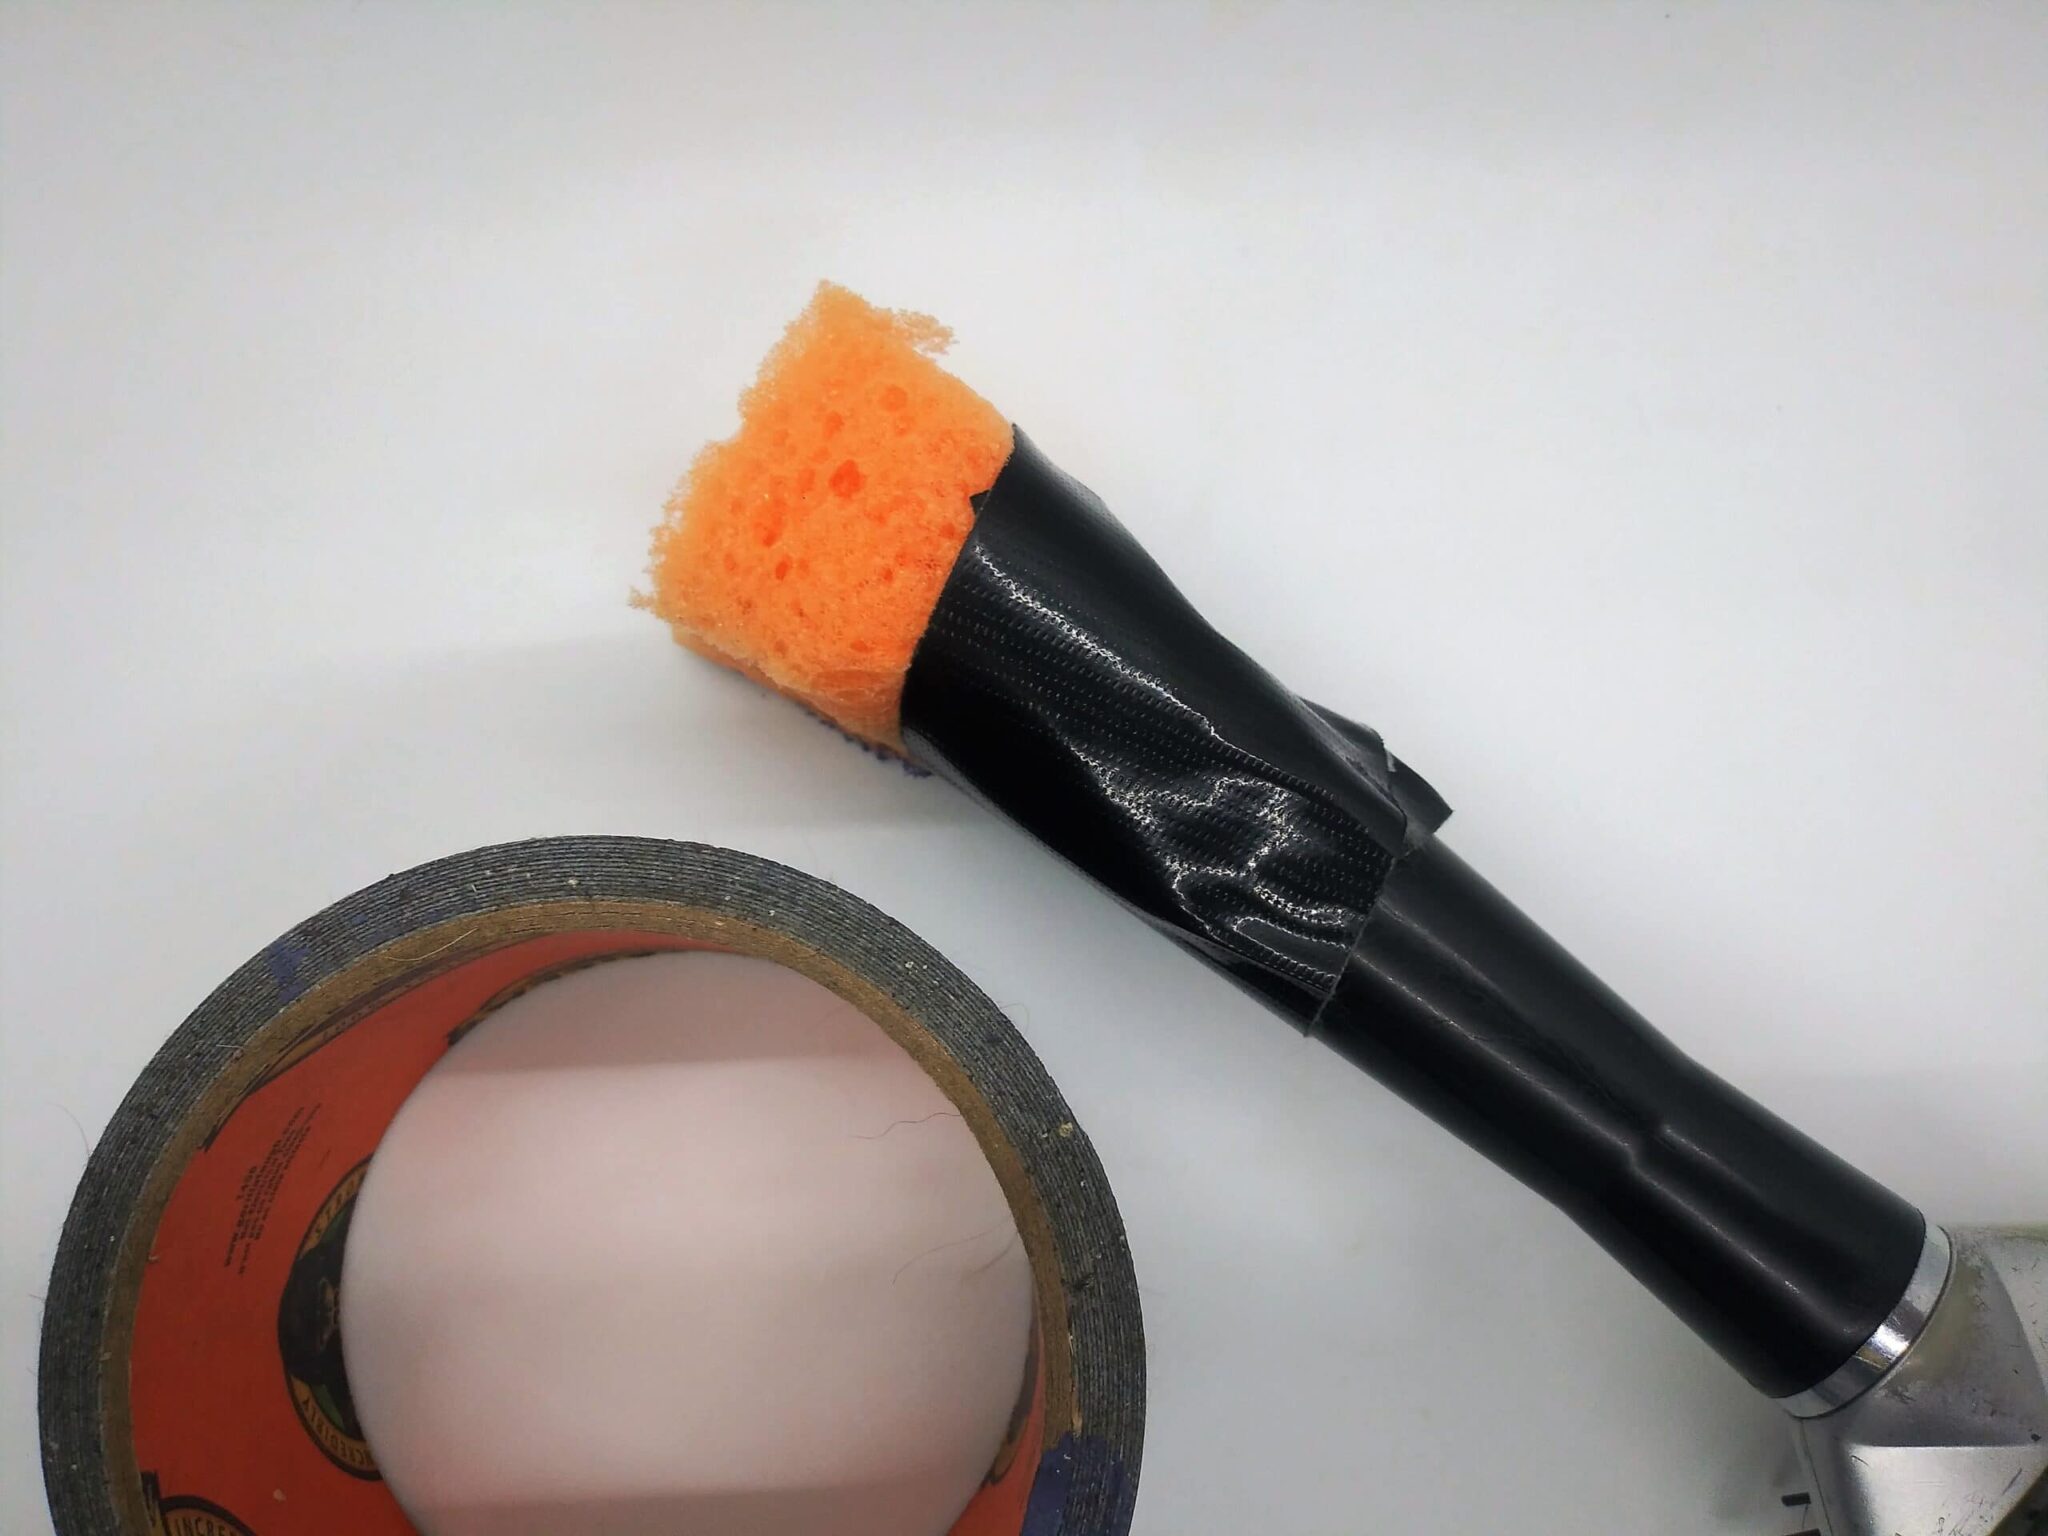 DIY anal sex toy made from a hairbrush, photo of a piece of sponge taped to the end of the brush handle.